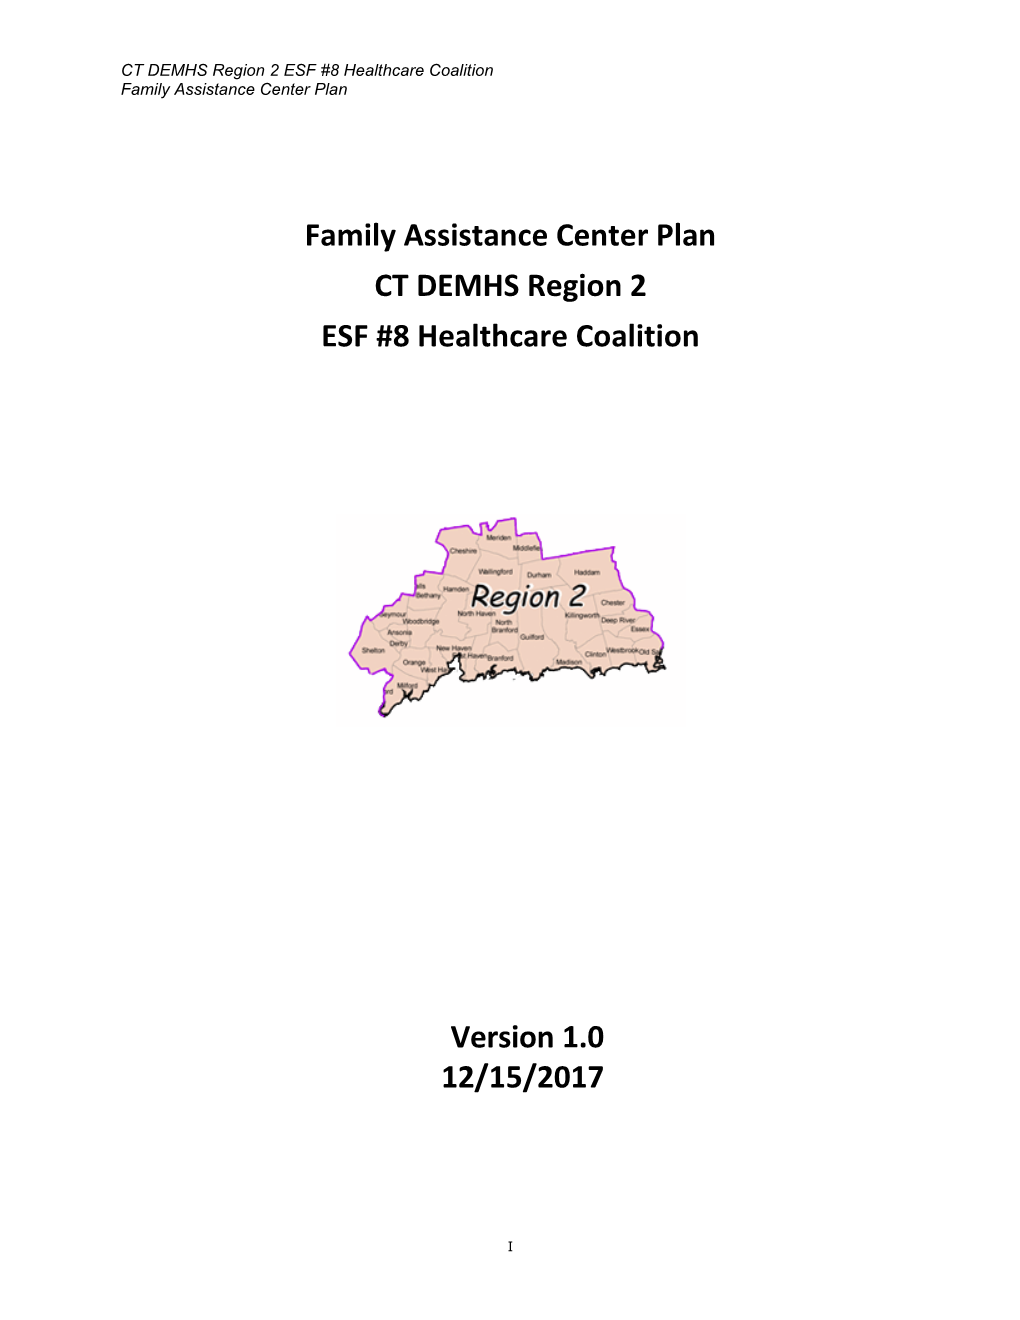 Family Assistance Center Plan CT DEMHS Region 2 ESF #8 Healthcare Coalition